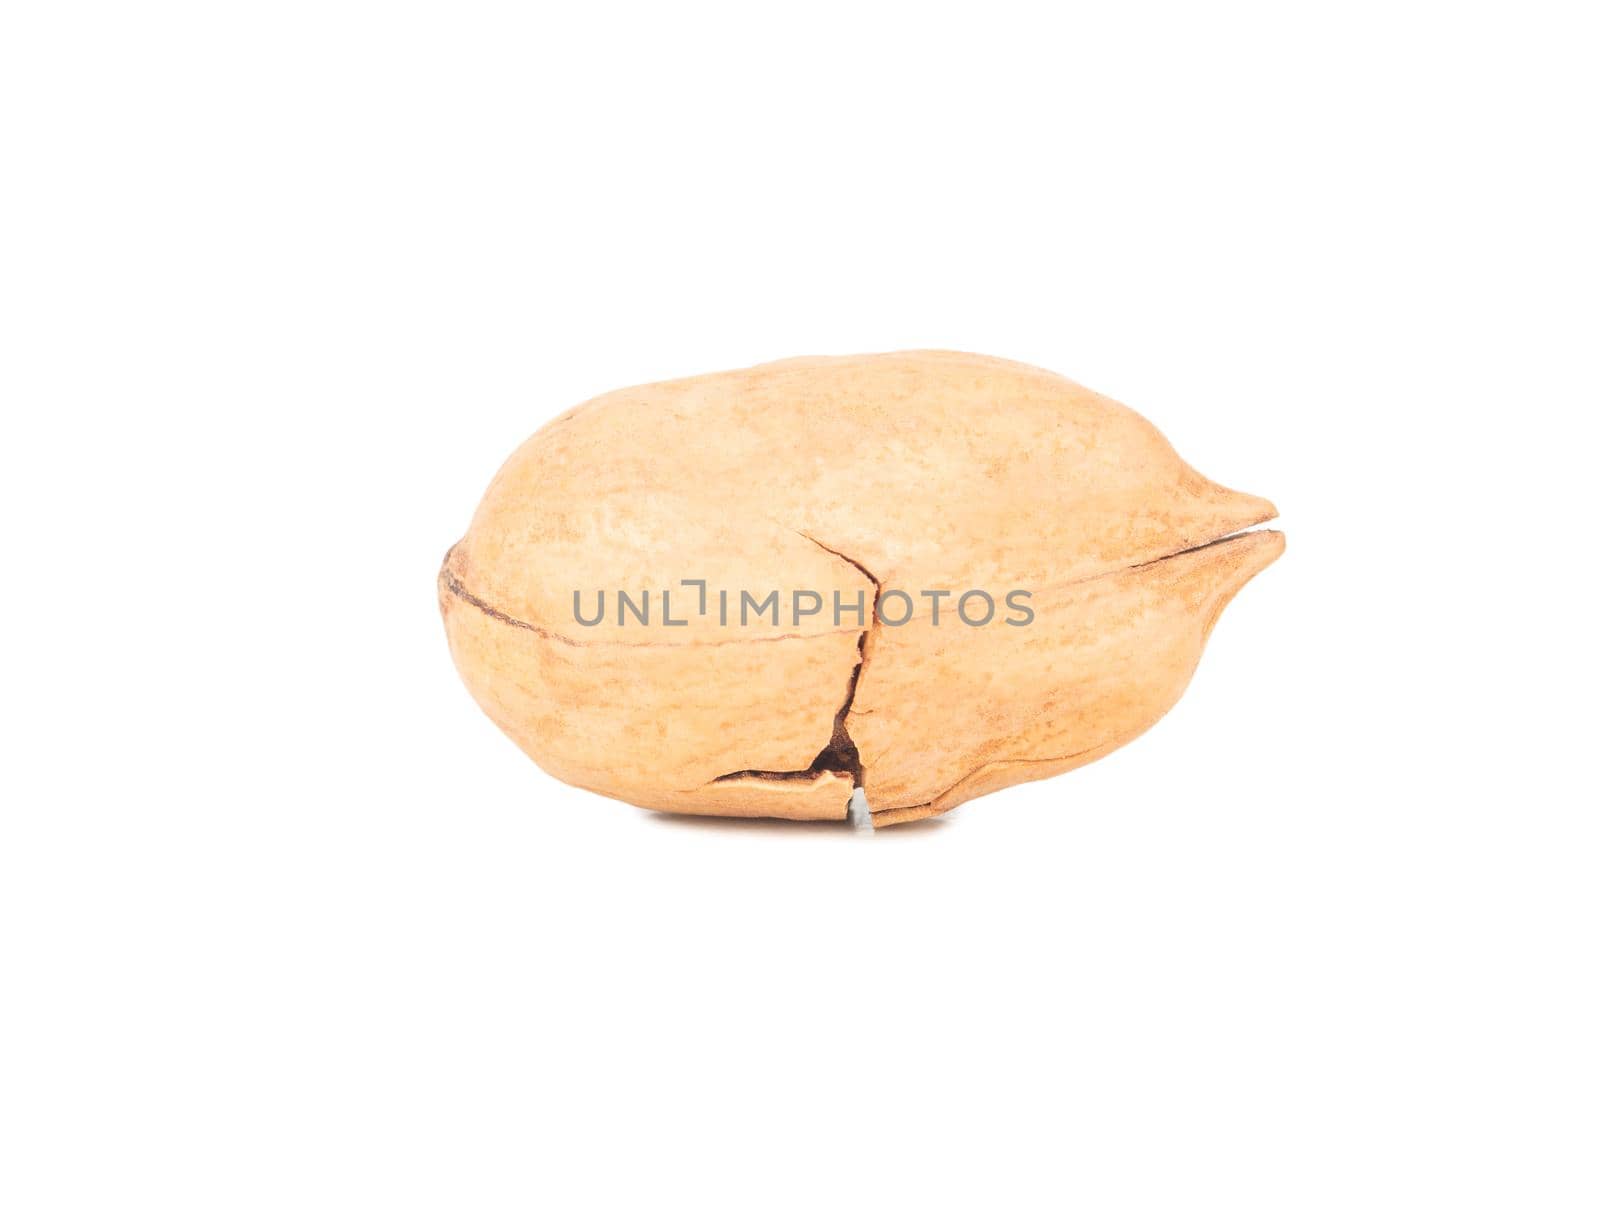 Pecan nut in shell isolated on white background